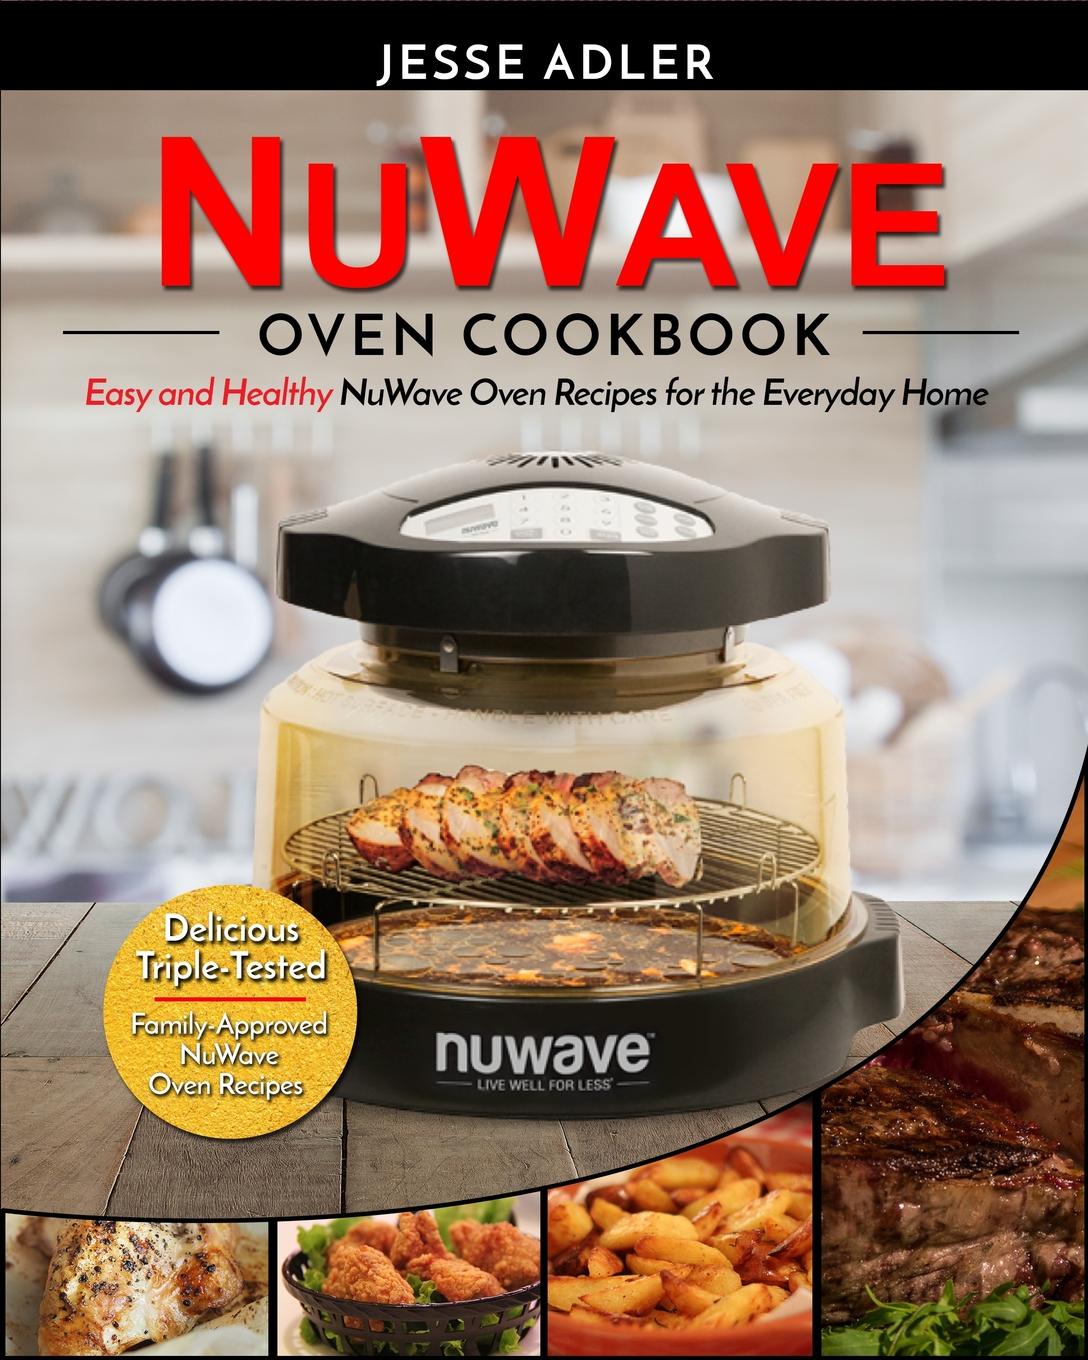 Nuwave Oven Cookbook. Easy . Healthy NuWave Oven Recipes for the Everyday Home - Delicious Triple-Tested, Family-Approved NuWave Oven Recipes